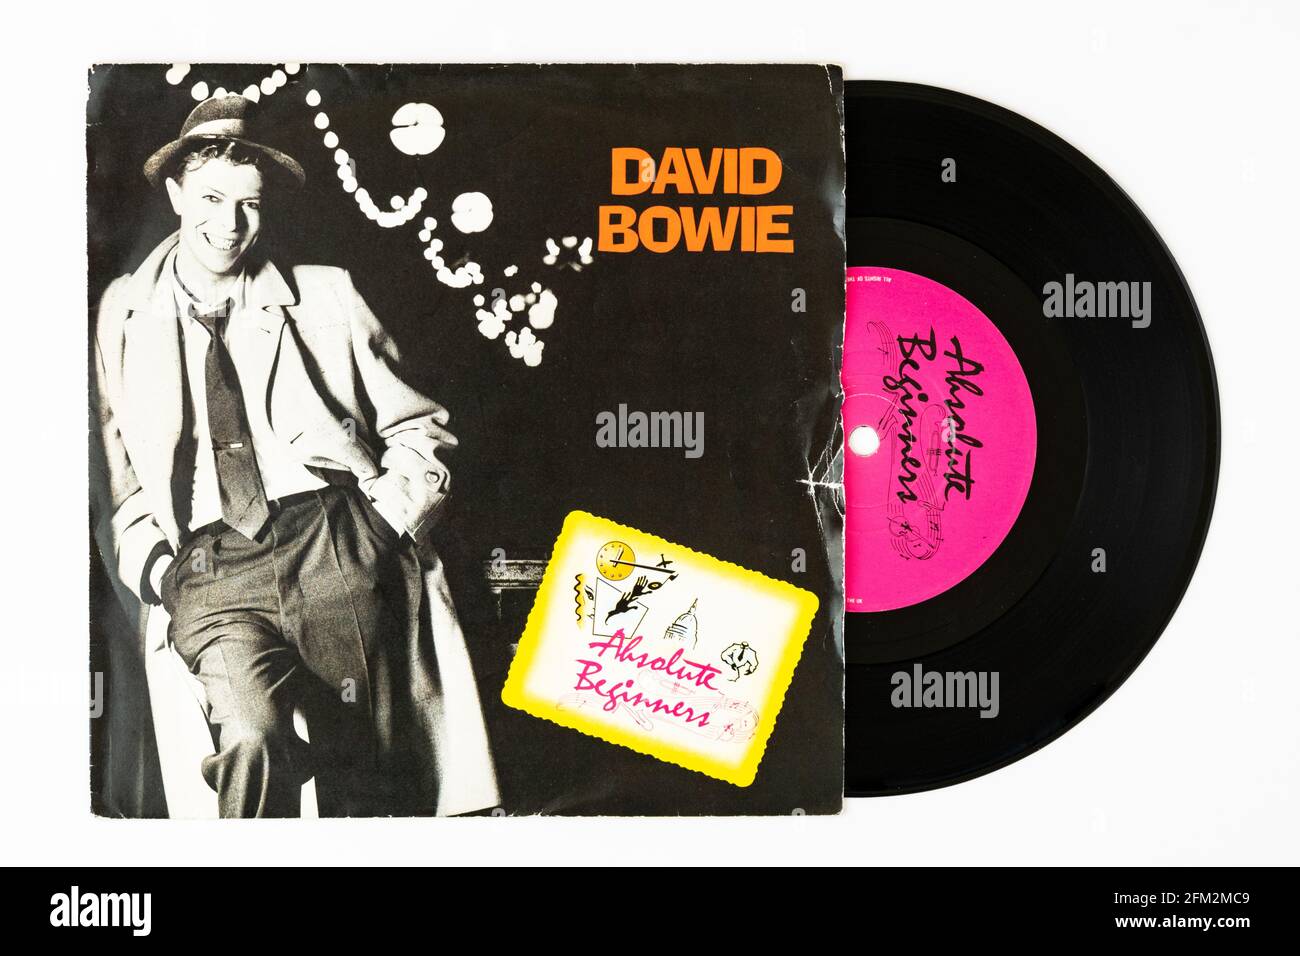 David Bowie single - Absolute Beginners Banque D'Images